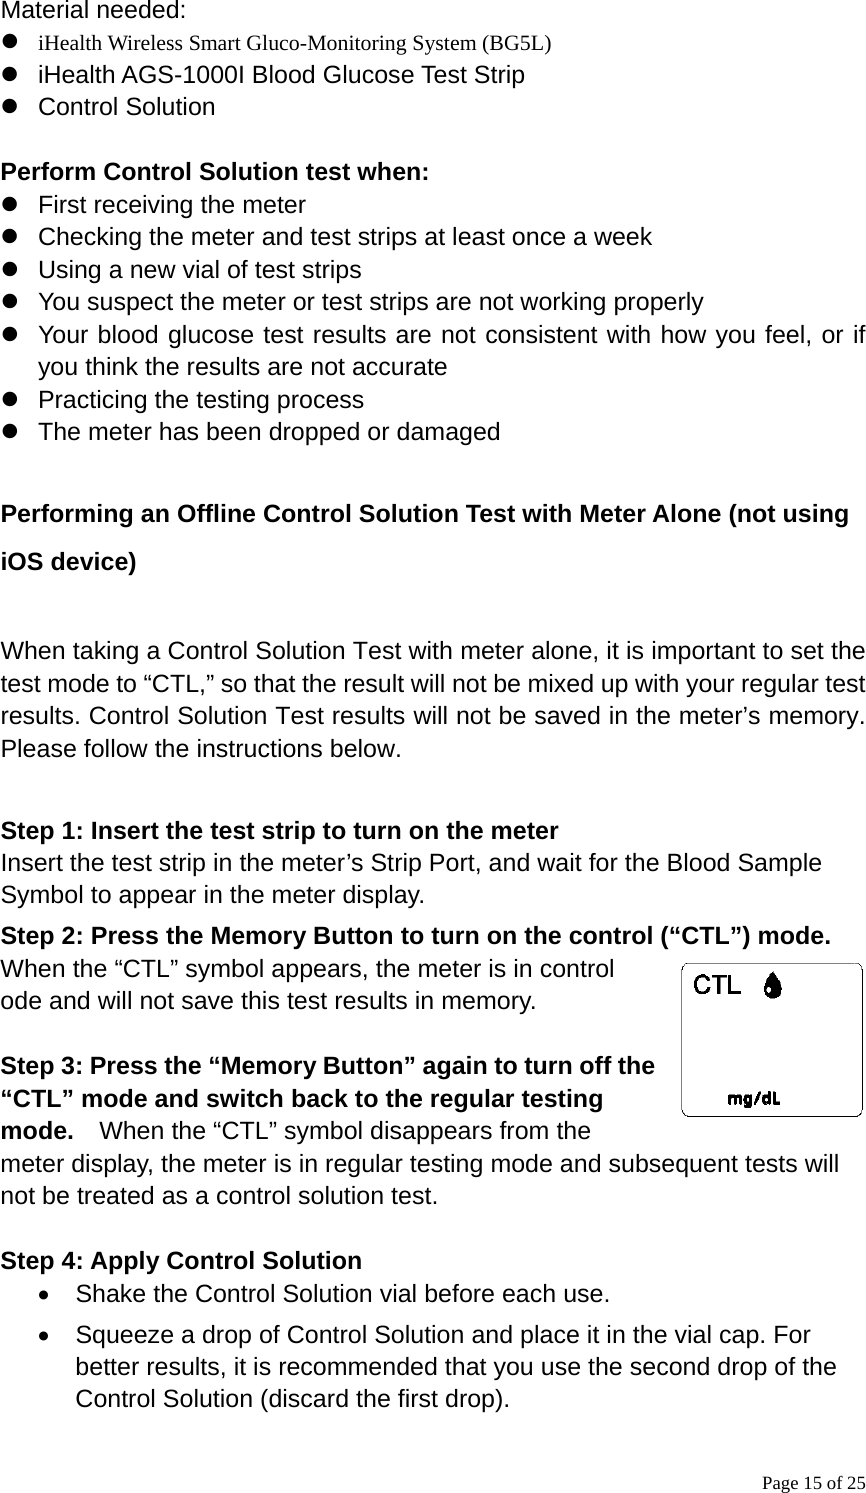 Page 15 of 25 Material needed: z iHealth Wireless Smart Gluco-Monitoring System (BG5L) z  iHealth AGS-1000I Blood Glucose Test Strip z Control Solution  Perform Control Solution test when: z  First receiving the meter z  Checking the meter and test strips at least once a week z  Using a new vial of test strips z  You suspect the meter or test strips are not working properly z  Your blood glucose test results are not consistent with how you feel, or if you think the results are not accurate z  Practicing the testing process z  The meter has been dropped or damaged  Performing an Offline Control Solution Test with Meter Alone (not using iOS device)  When taking a Control Solution Test with meter alone, it is important to set the test mode to “CTL,” so that the result will not be mixed up with your regular test results. Control Solution Test results will not be saved in the meter’s memory. Please follow the instructions below.  Step 1: Insert the test strip to turn on the meter Insert the test strip in the meter’s Strip Port, and wait for the Blood Sample Symbol to appear in the meter display. Step 2: Press the Memory Button to turn on the control (“CTL”) mode. When the “CTL” symbol appears, the meter is in control ode and will not save this test results in memory.    Step 3: Press the “Memory Button” again to turn off the “CTL” mode and switch back to the regular testing mode.    When the “CTL” symbol disappears from the meter display, the meter is in regular testing mode and subsequent tests will not be treated as a control solution test.                                                  Step 4: Apply Control Solution •  Shake the Control Solution vial before each use.   •  Squeeze a drop of Control Solution and place it in the vial cap. For better results, it is recommended that you use the second drop of the Control Solution (discard the first drop). 